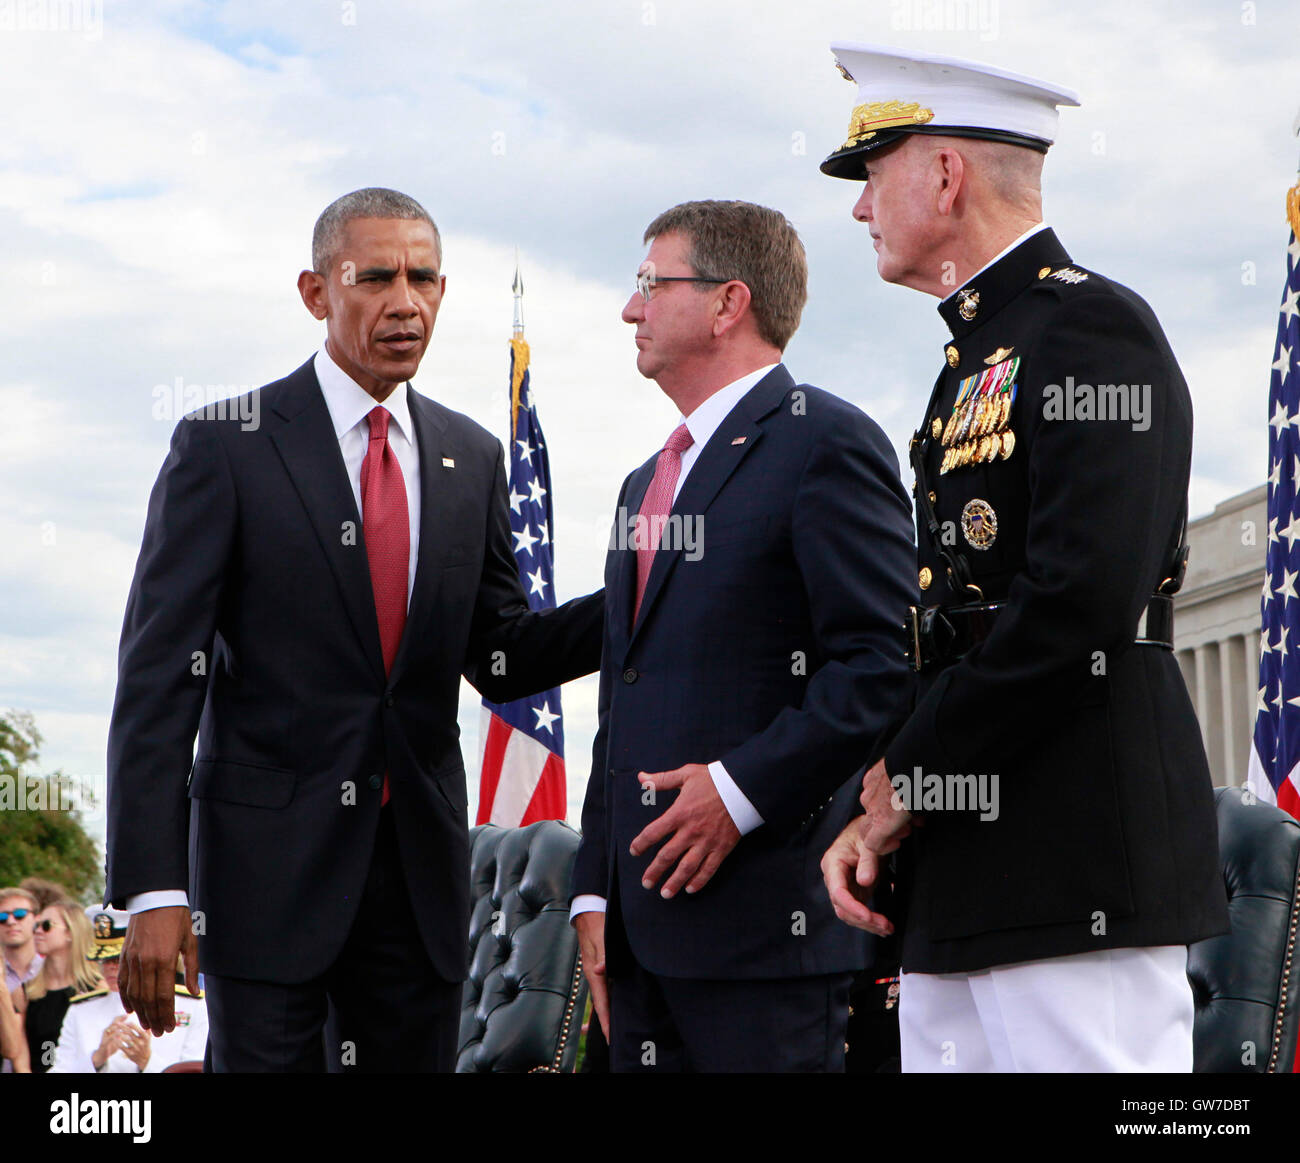 WASHINGTON DC - SEPTEMBER 11: United States President Barack Obama, left, with US Secretary of Defense Ash Carter, center, and US Marine Corps General Joseph F. Dunford Jr., Chairman of the Joint Chiefs of Staff, right, at the Pentagon Memorial in Washington, DC during an observance ceremony to commemorate the 15th anniversary of the 9/11 terrorist attacks, Sunday, September 11, 2016. Credit: Dennis Brack / Pool via CNP/MediaPunch Stock Photo